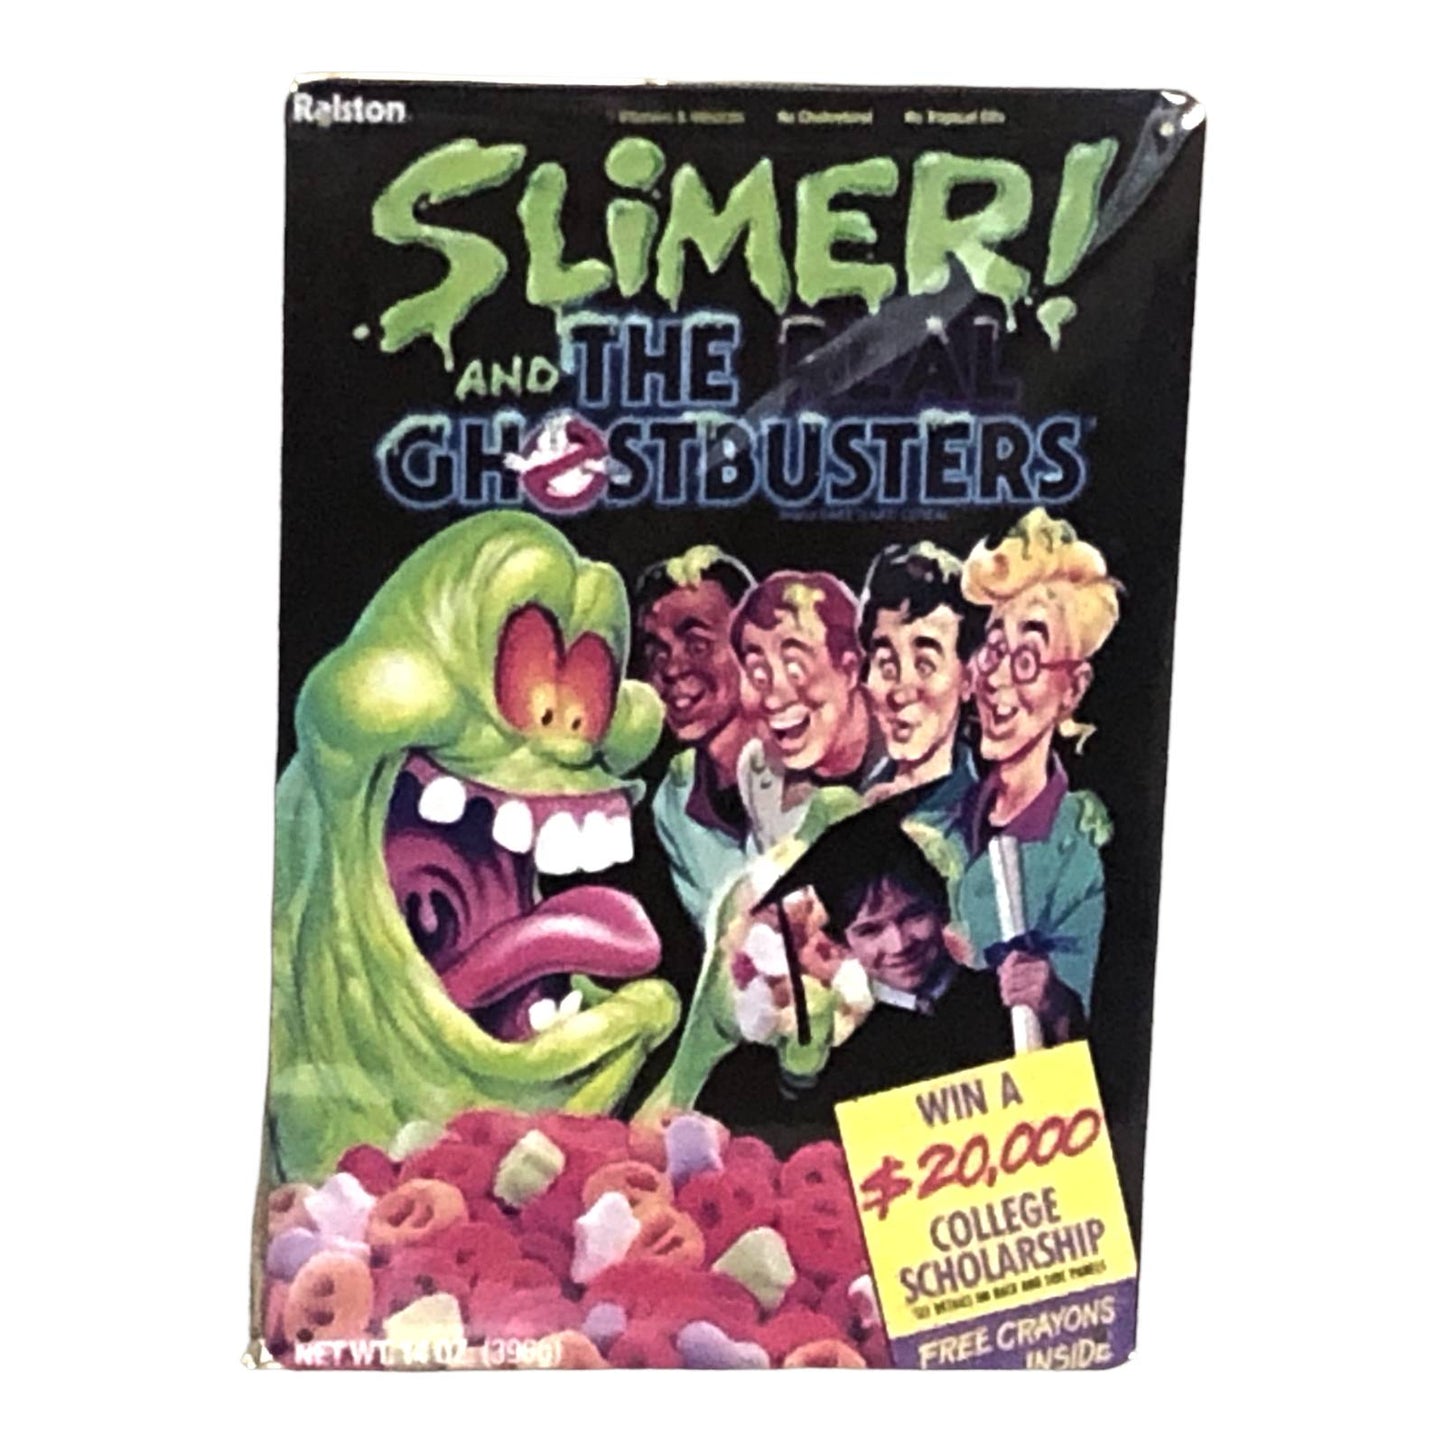 Slimer & The Real Ghostbusters Cereal Box Cover Poster Metal Tin Sign 8"x12"